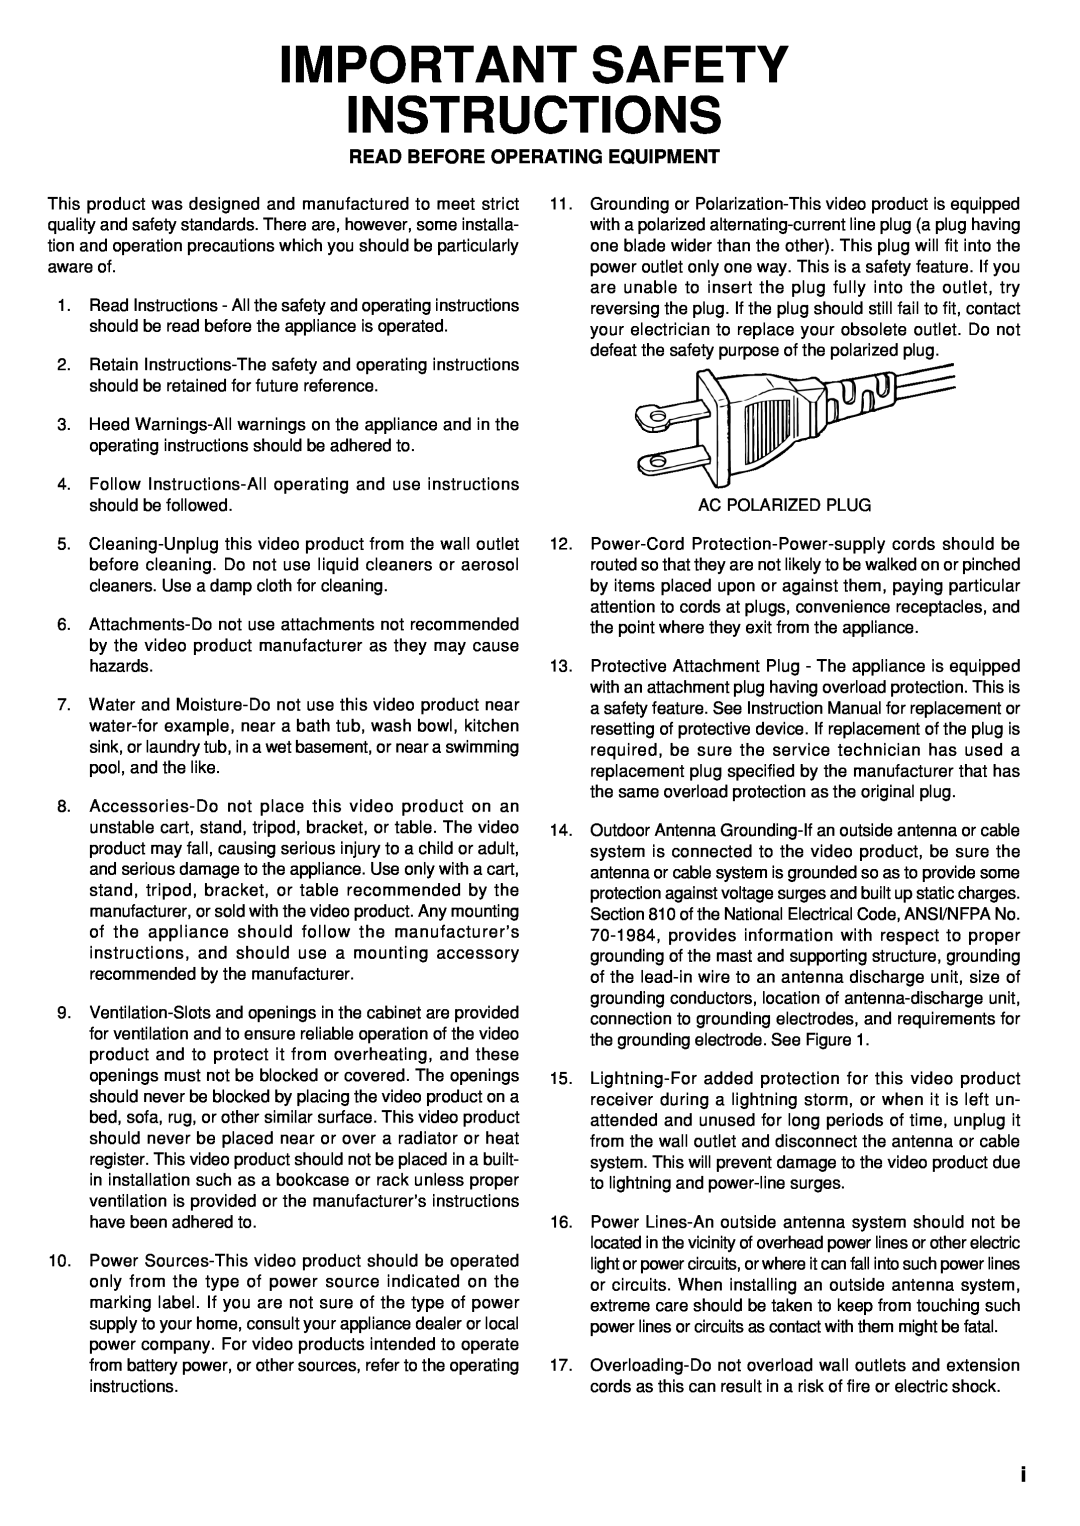 Marantz CD110 manual Important Safety Instructions, Read Before Operating Equipment 